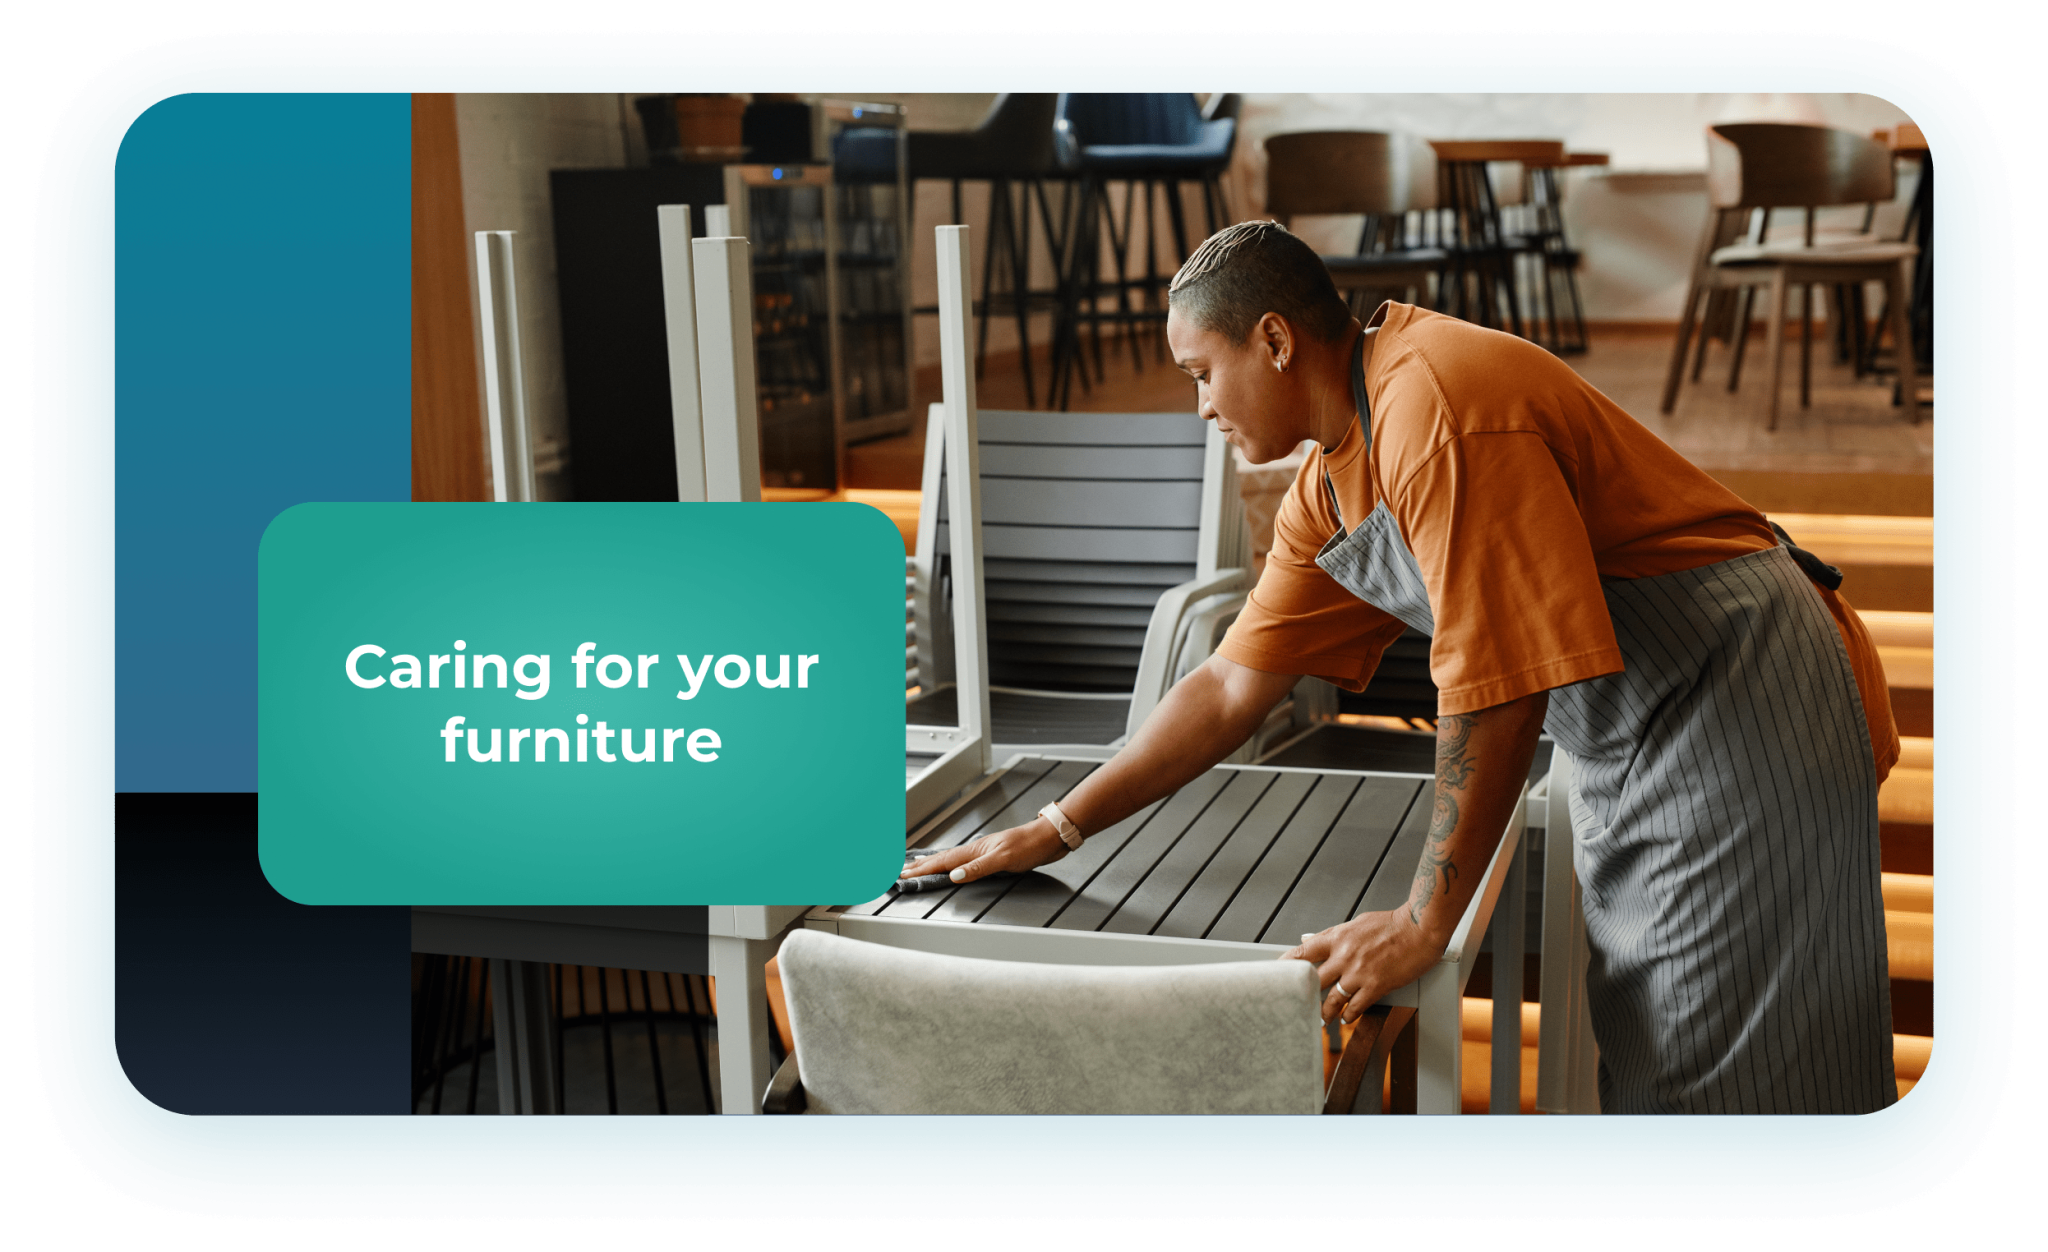 Caring for your furniture